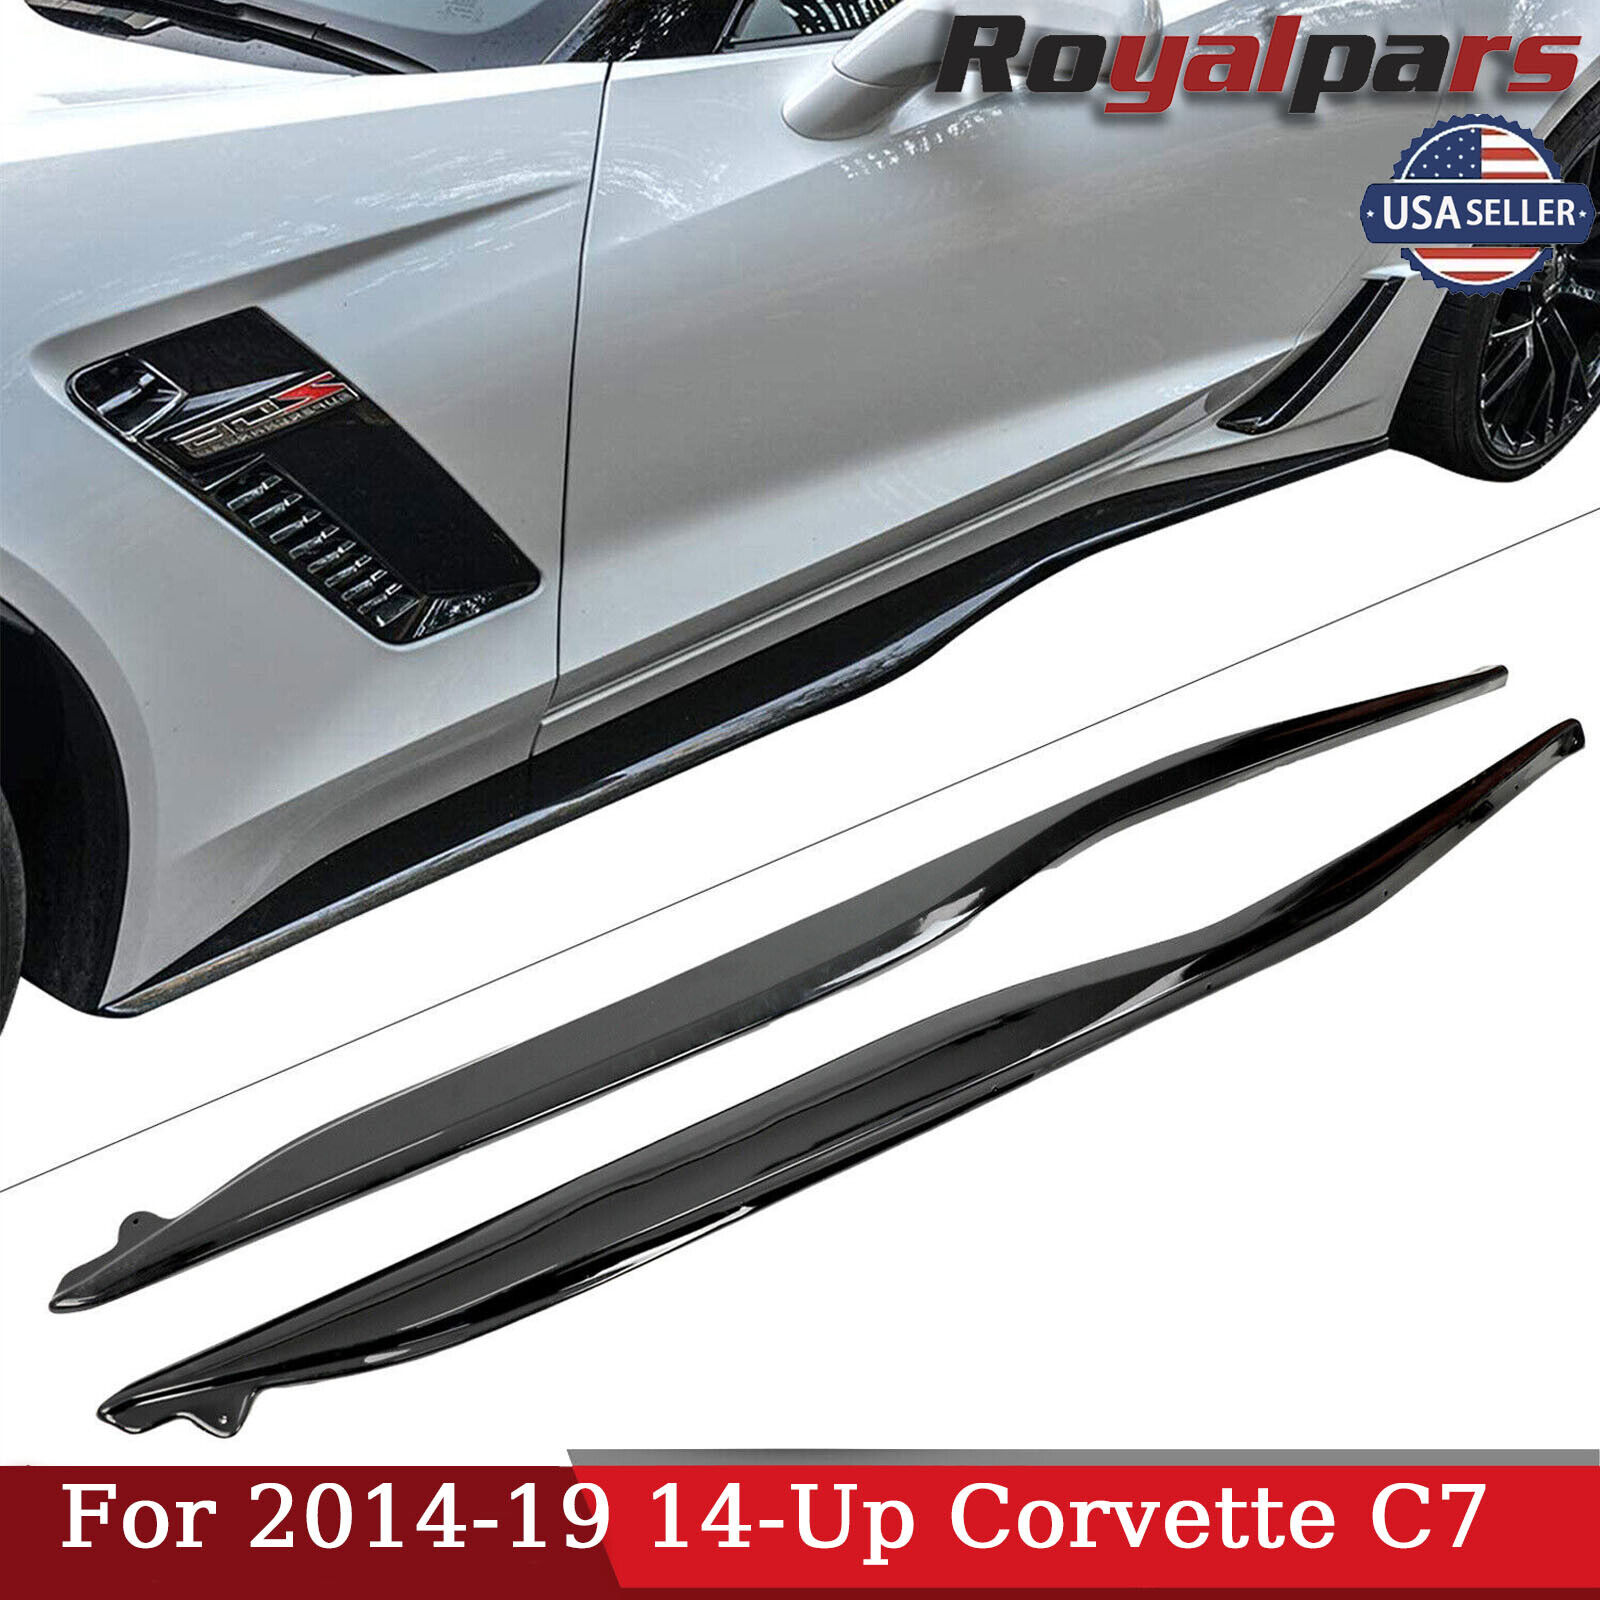 For 2014-19 14-Up Corvette C7 ABS Plastic Side Skirts Z06 Style ABS GLOSS BLACK